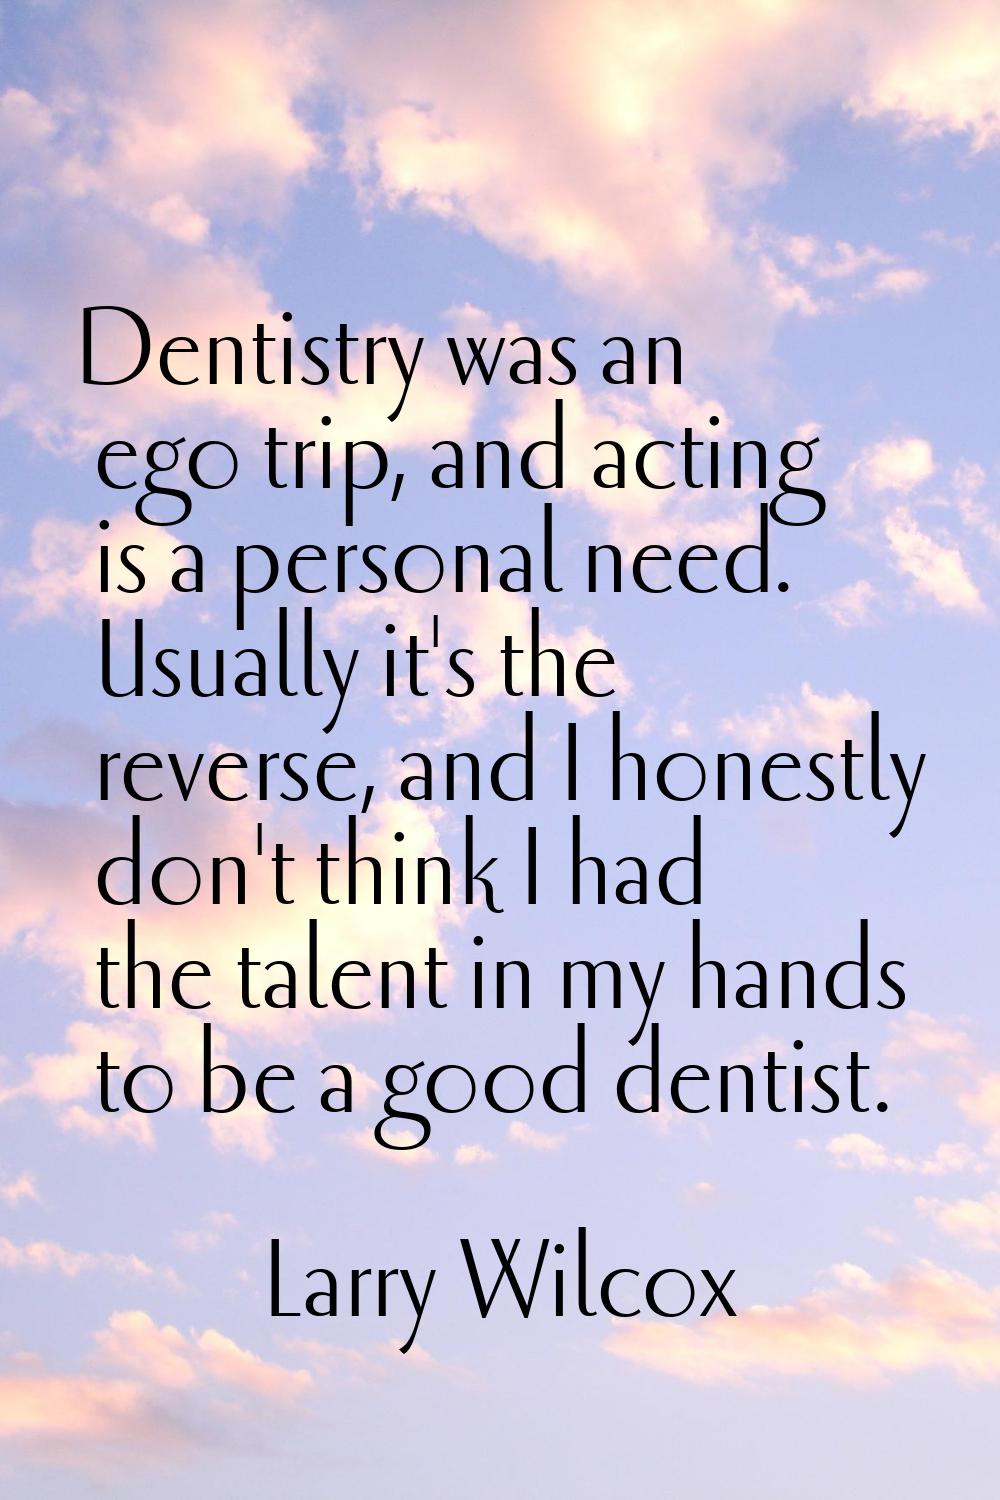 Dentistry was an ego trip, and acting is a personal need. Usually it's the reverse, and I honestly 